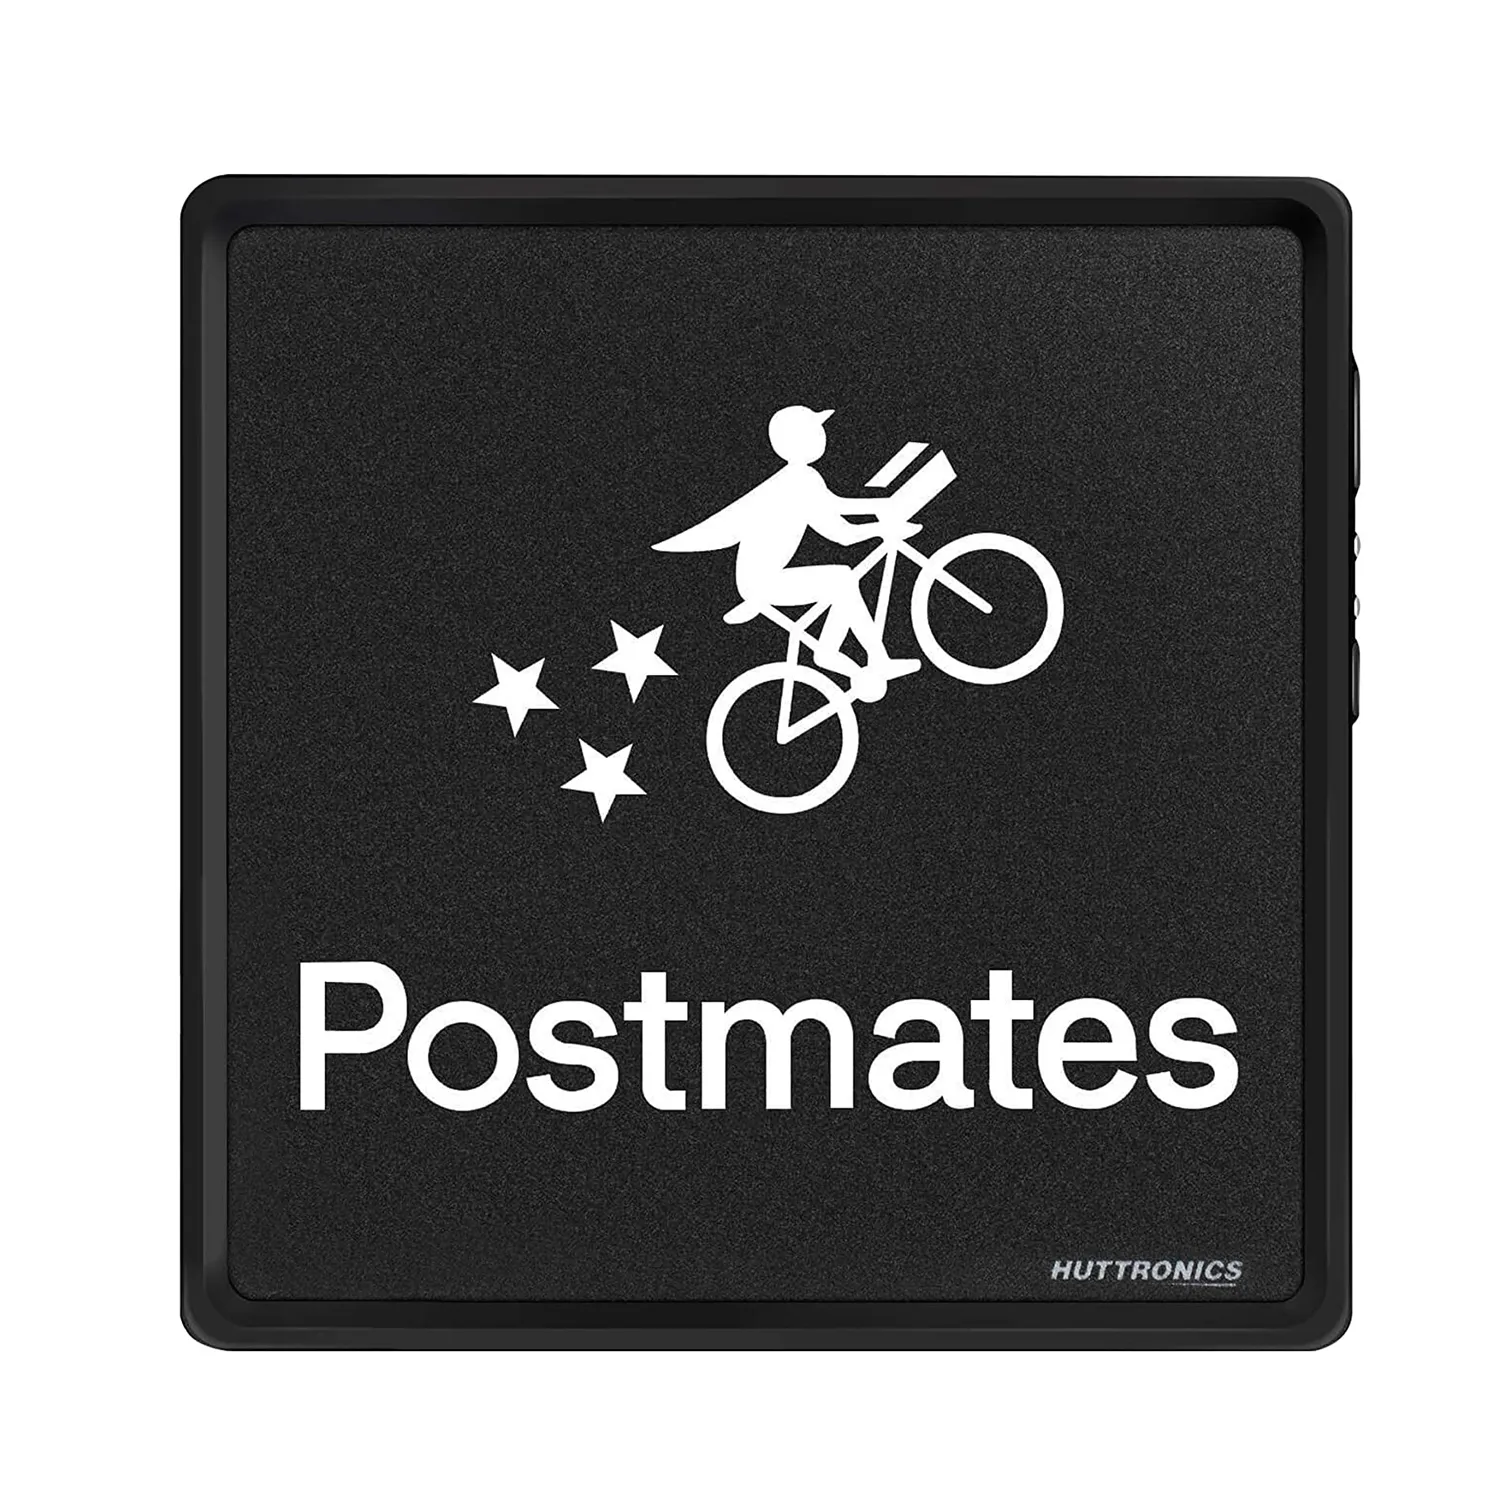 Postmates Light Sign Bright LED Amp for badges Door Dashers Removable Rechargeable Food Delivery Service with Mounting Cradle and 12Hour Wireless Operation